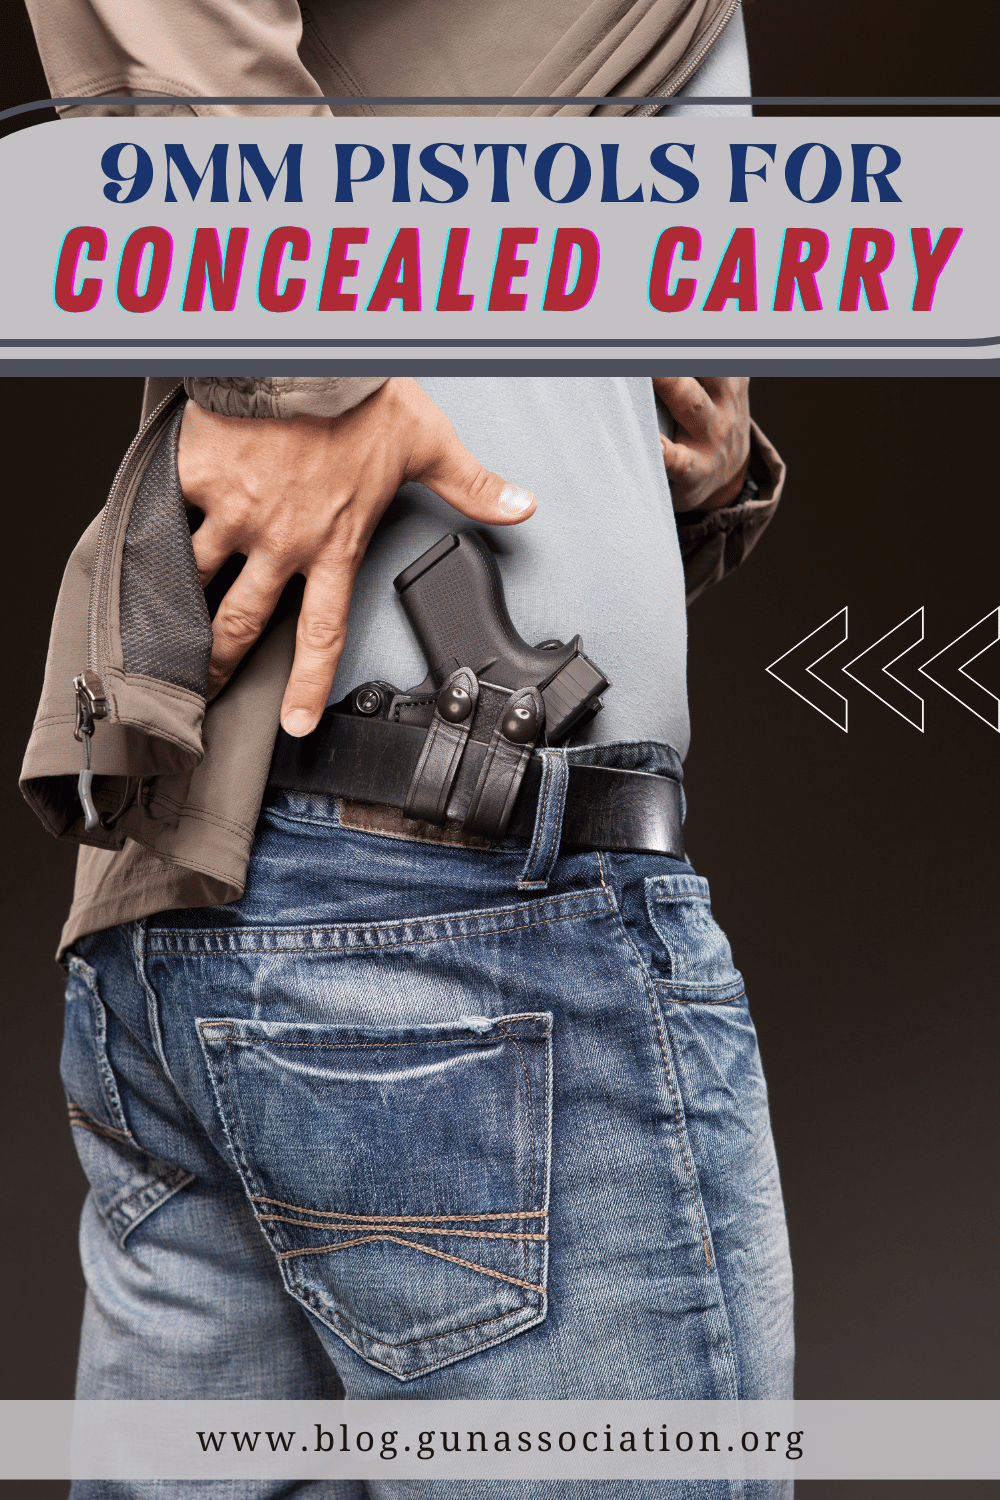 9mm pistols for concealed carry